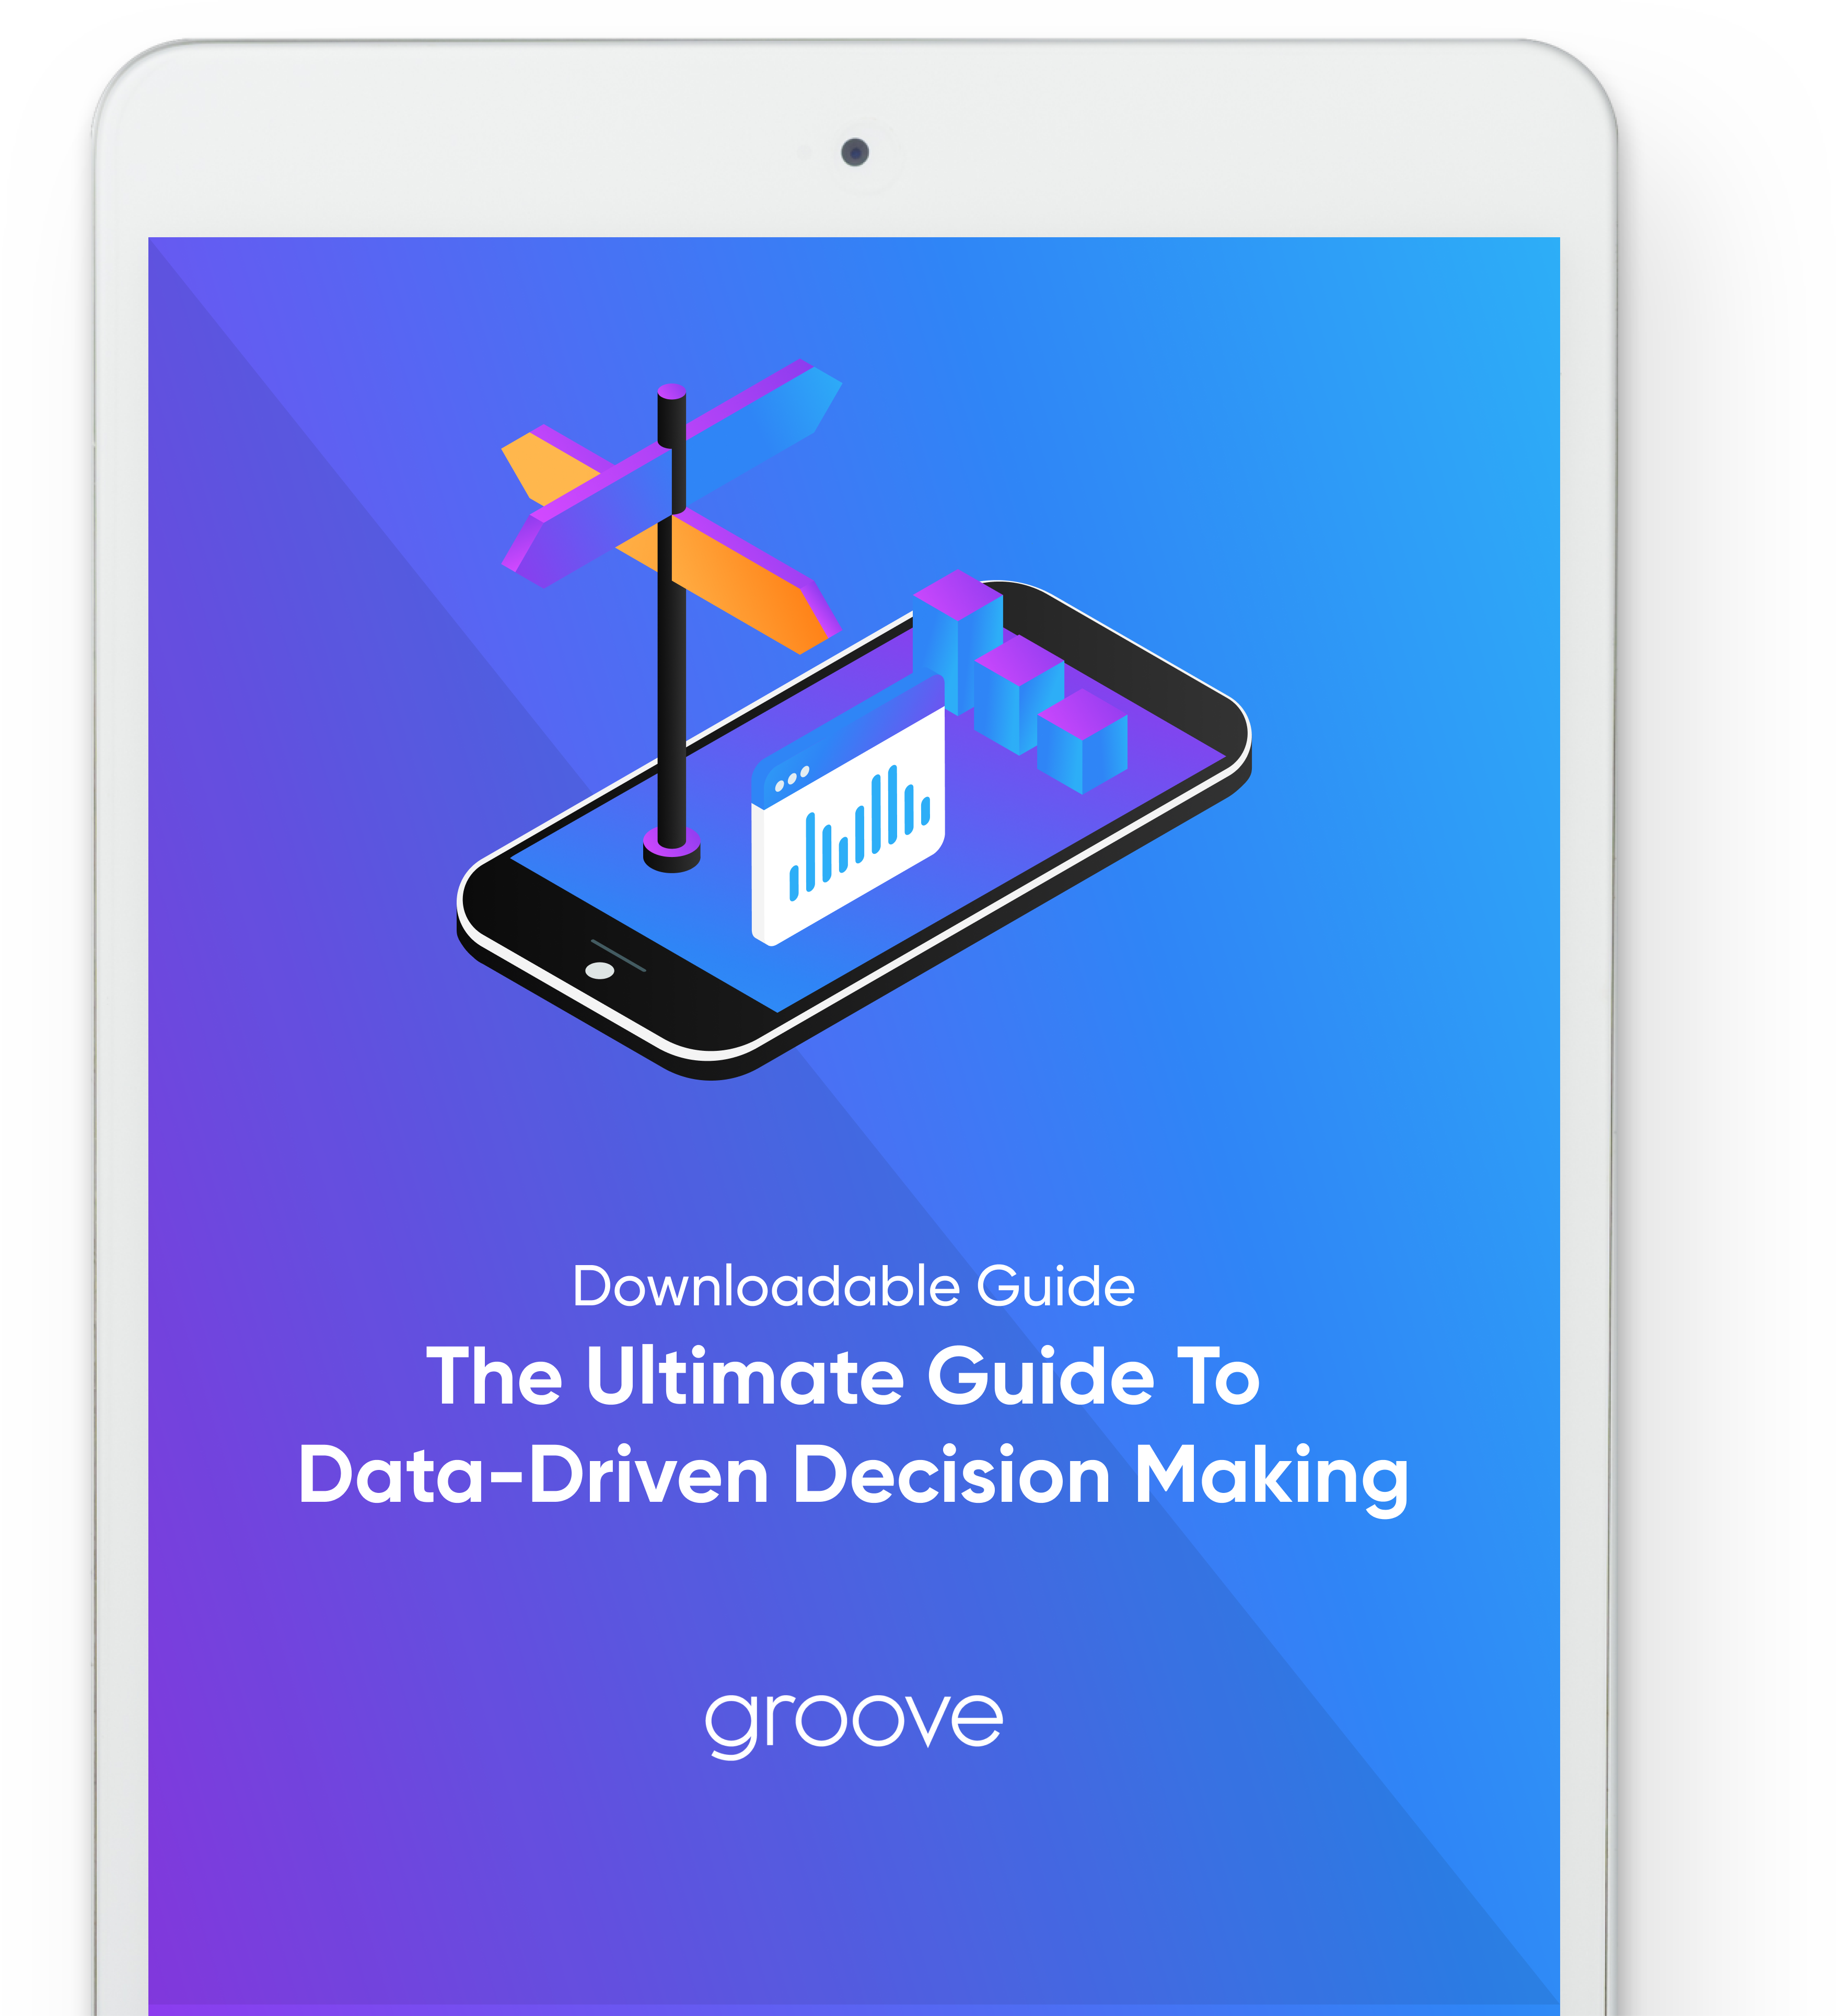 The Ultimate Guide To Data-Driven Decision Making